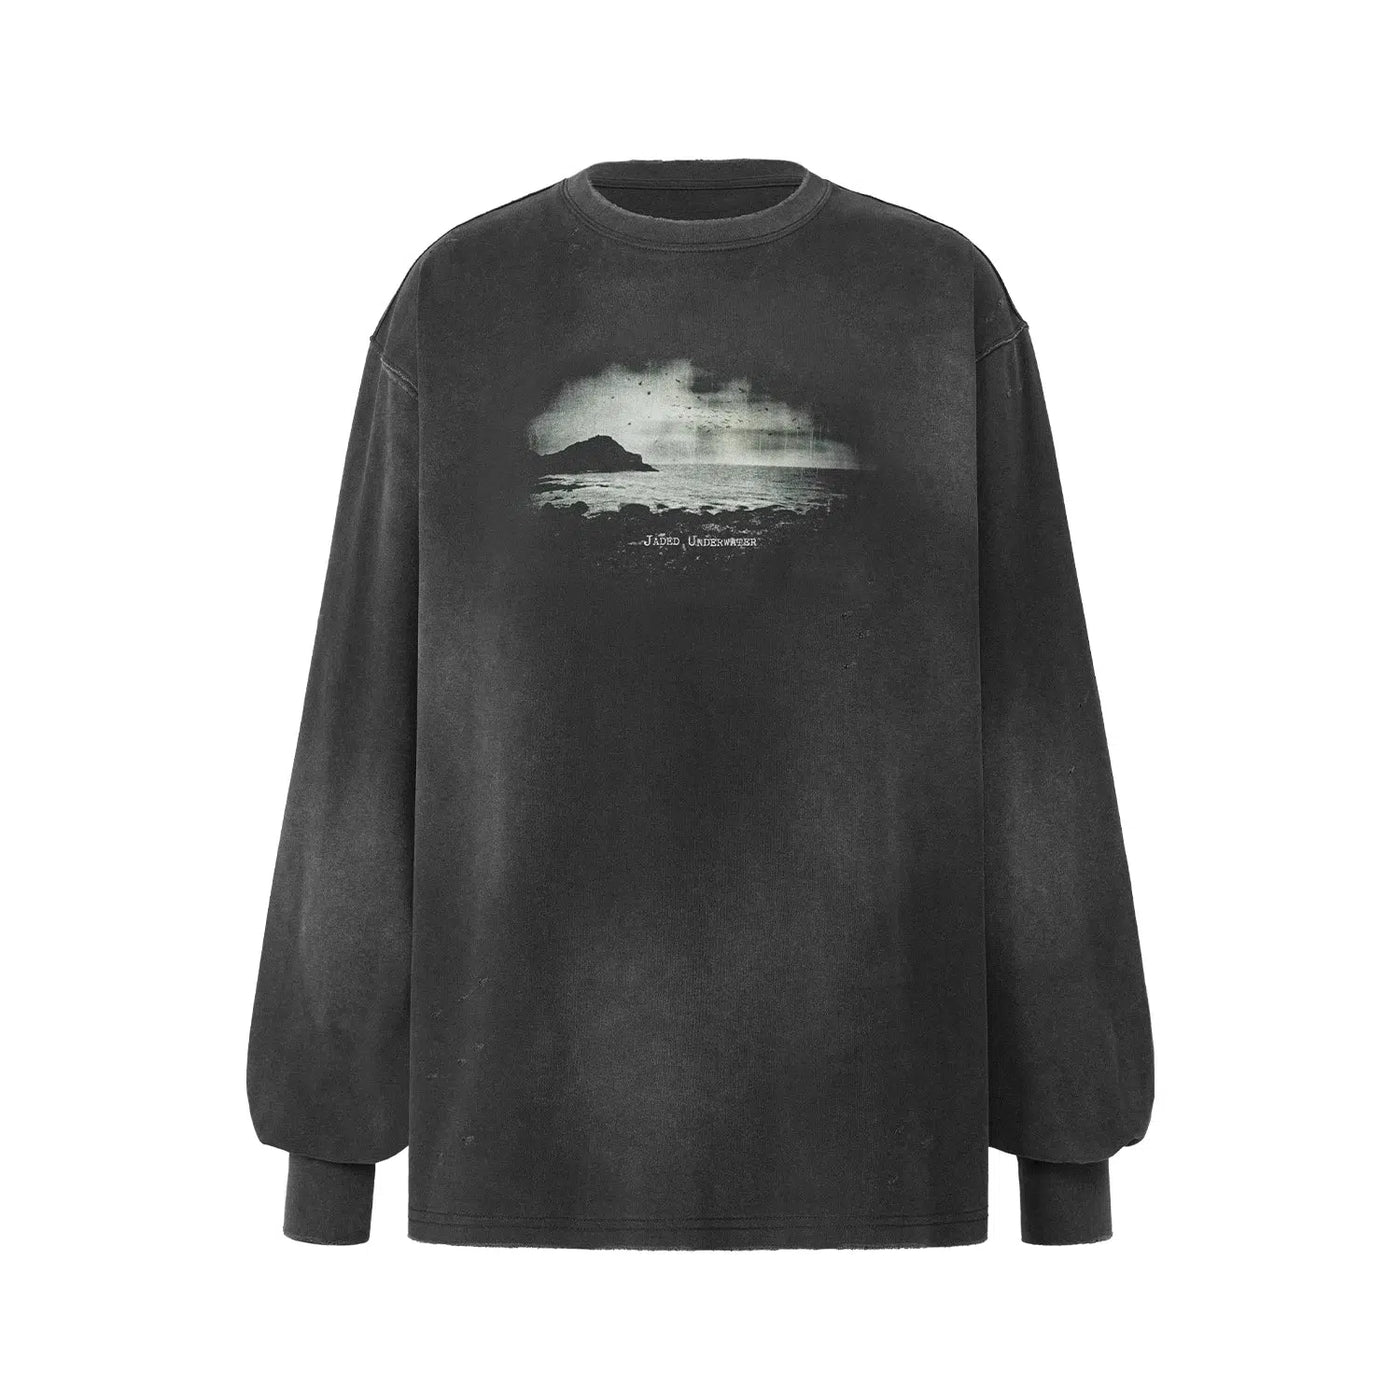 Scenery Graphic Washed Crewneck Korean Street Fashion Crewneck By Underwater Shop Online at OH Vault